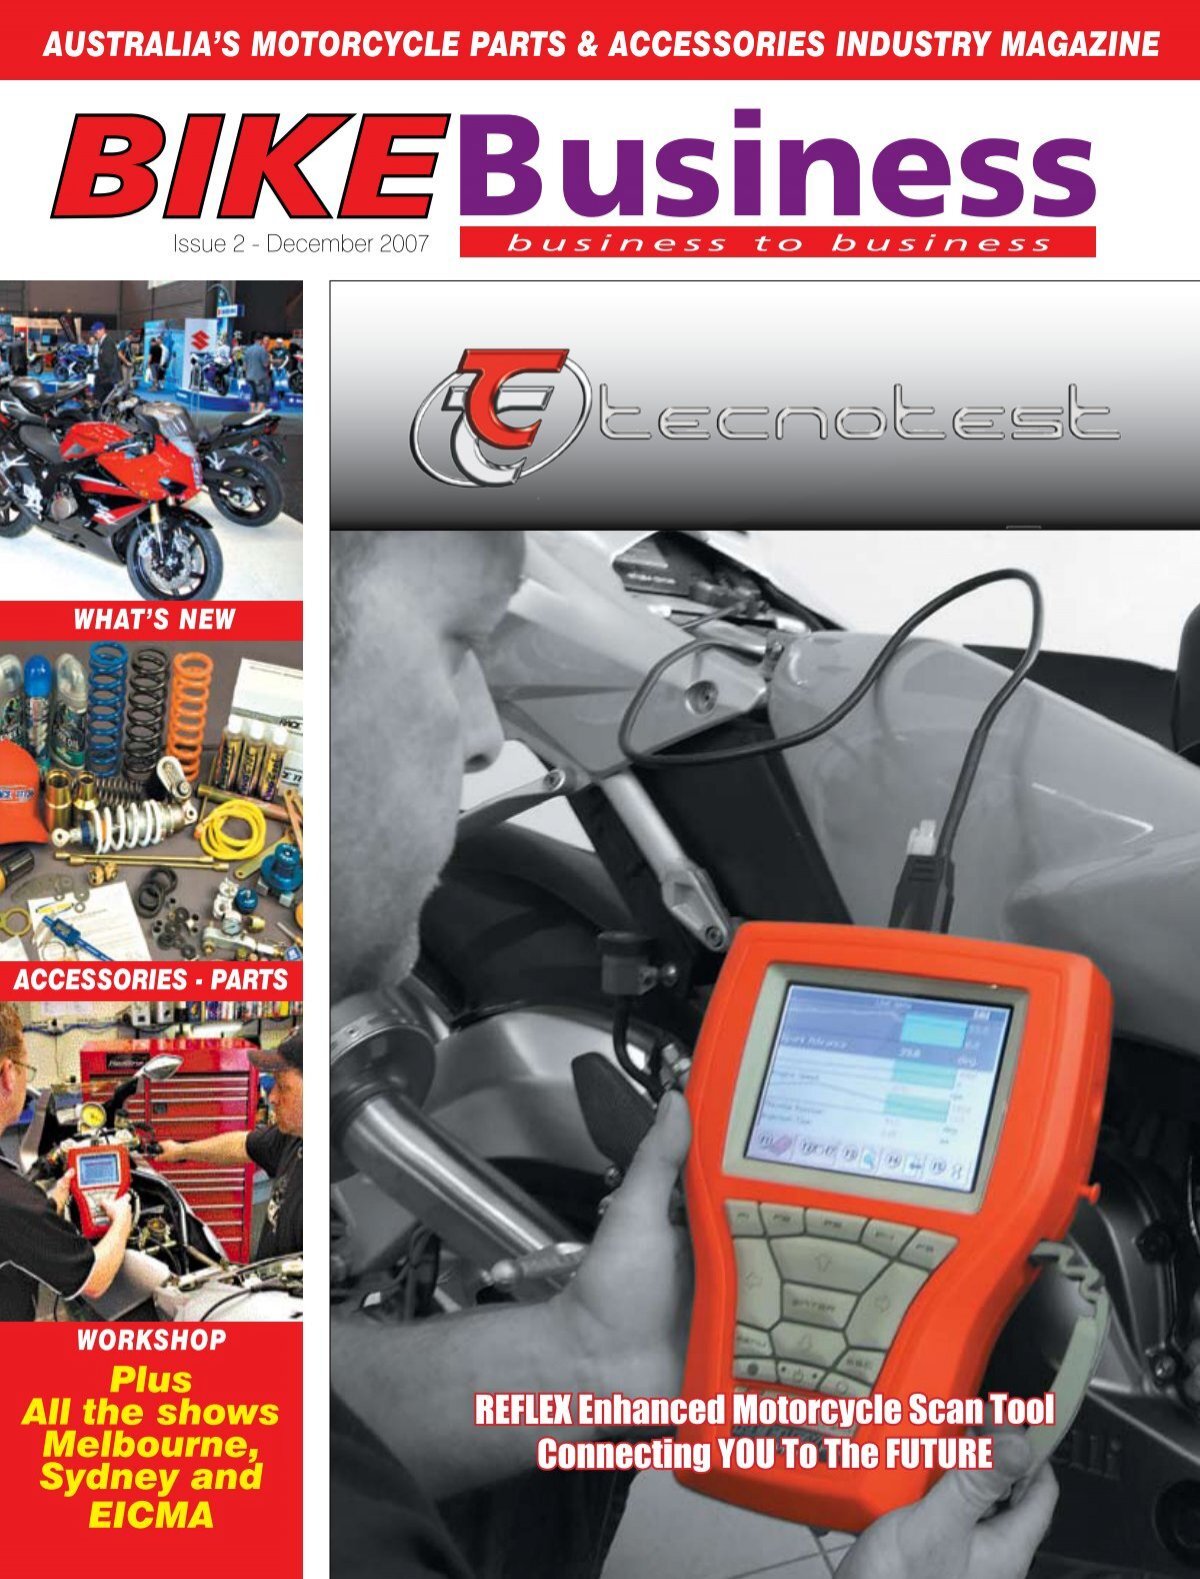 australia's motorcycle parts & accessories industry - Bike Business